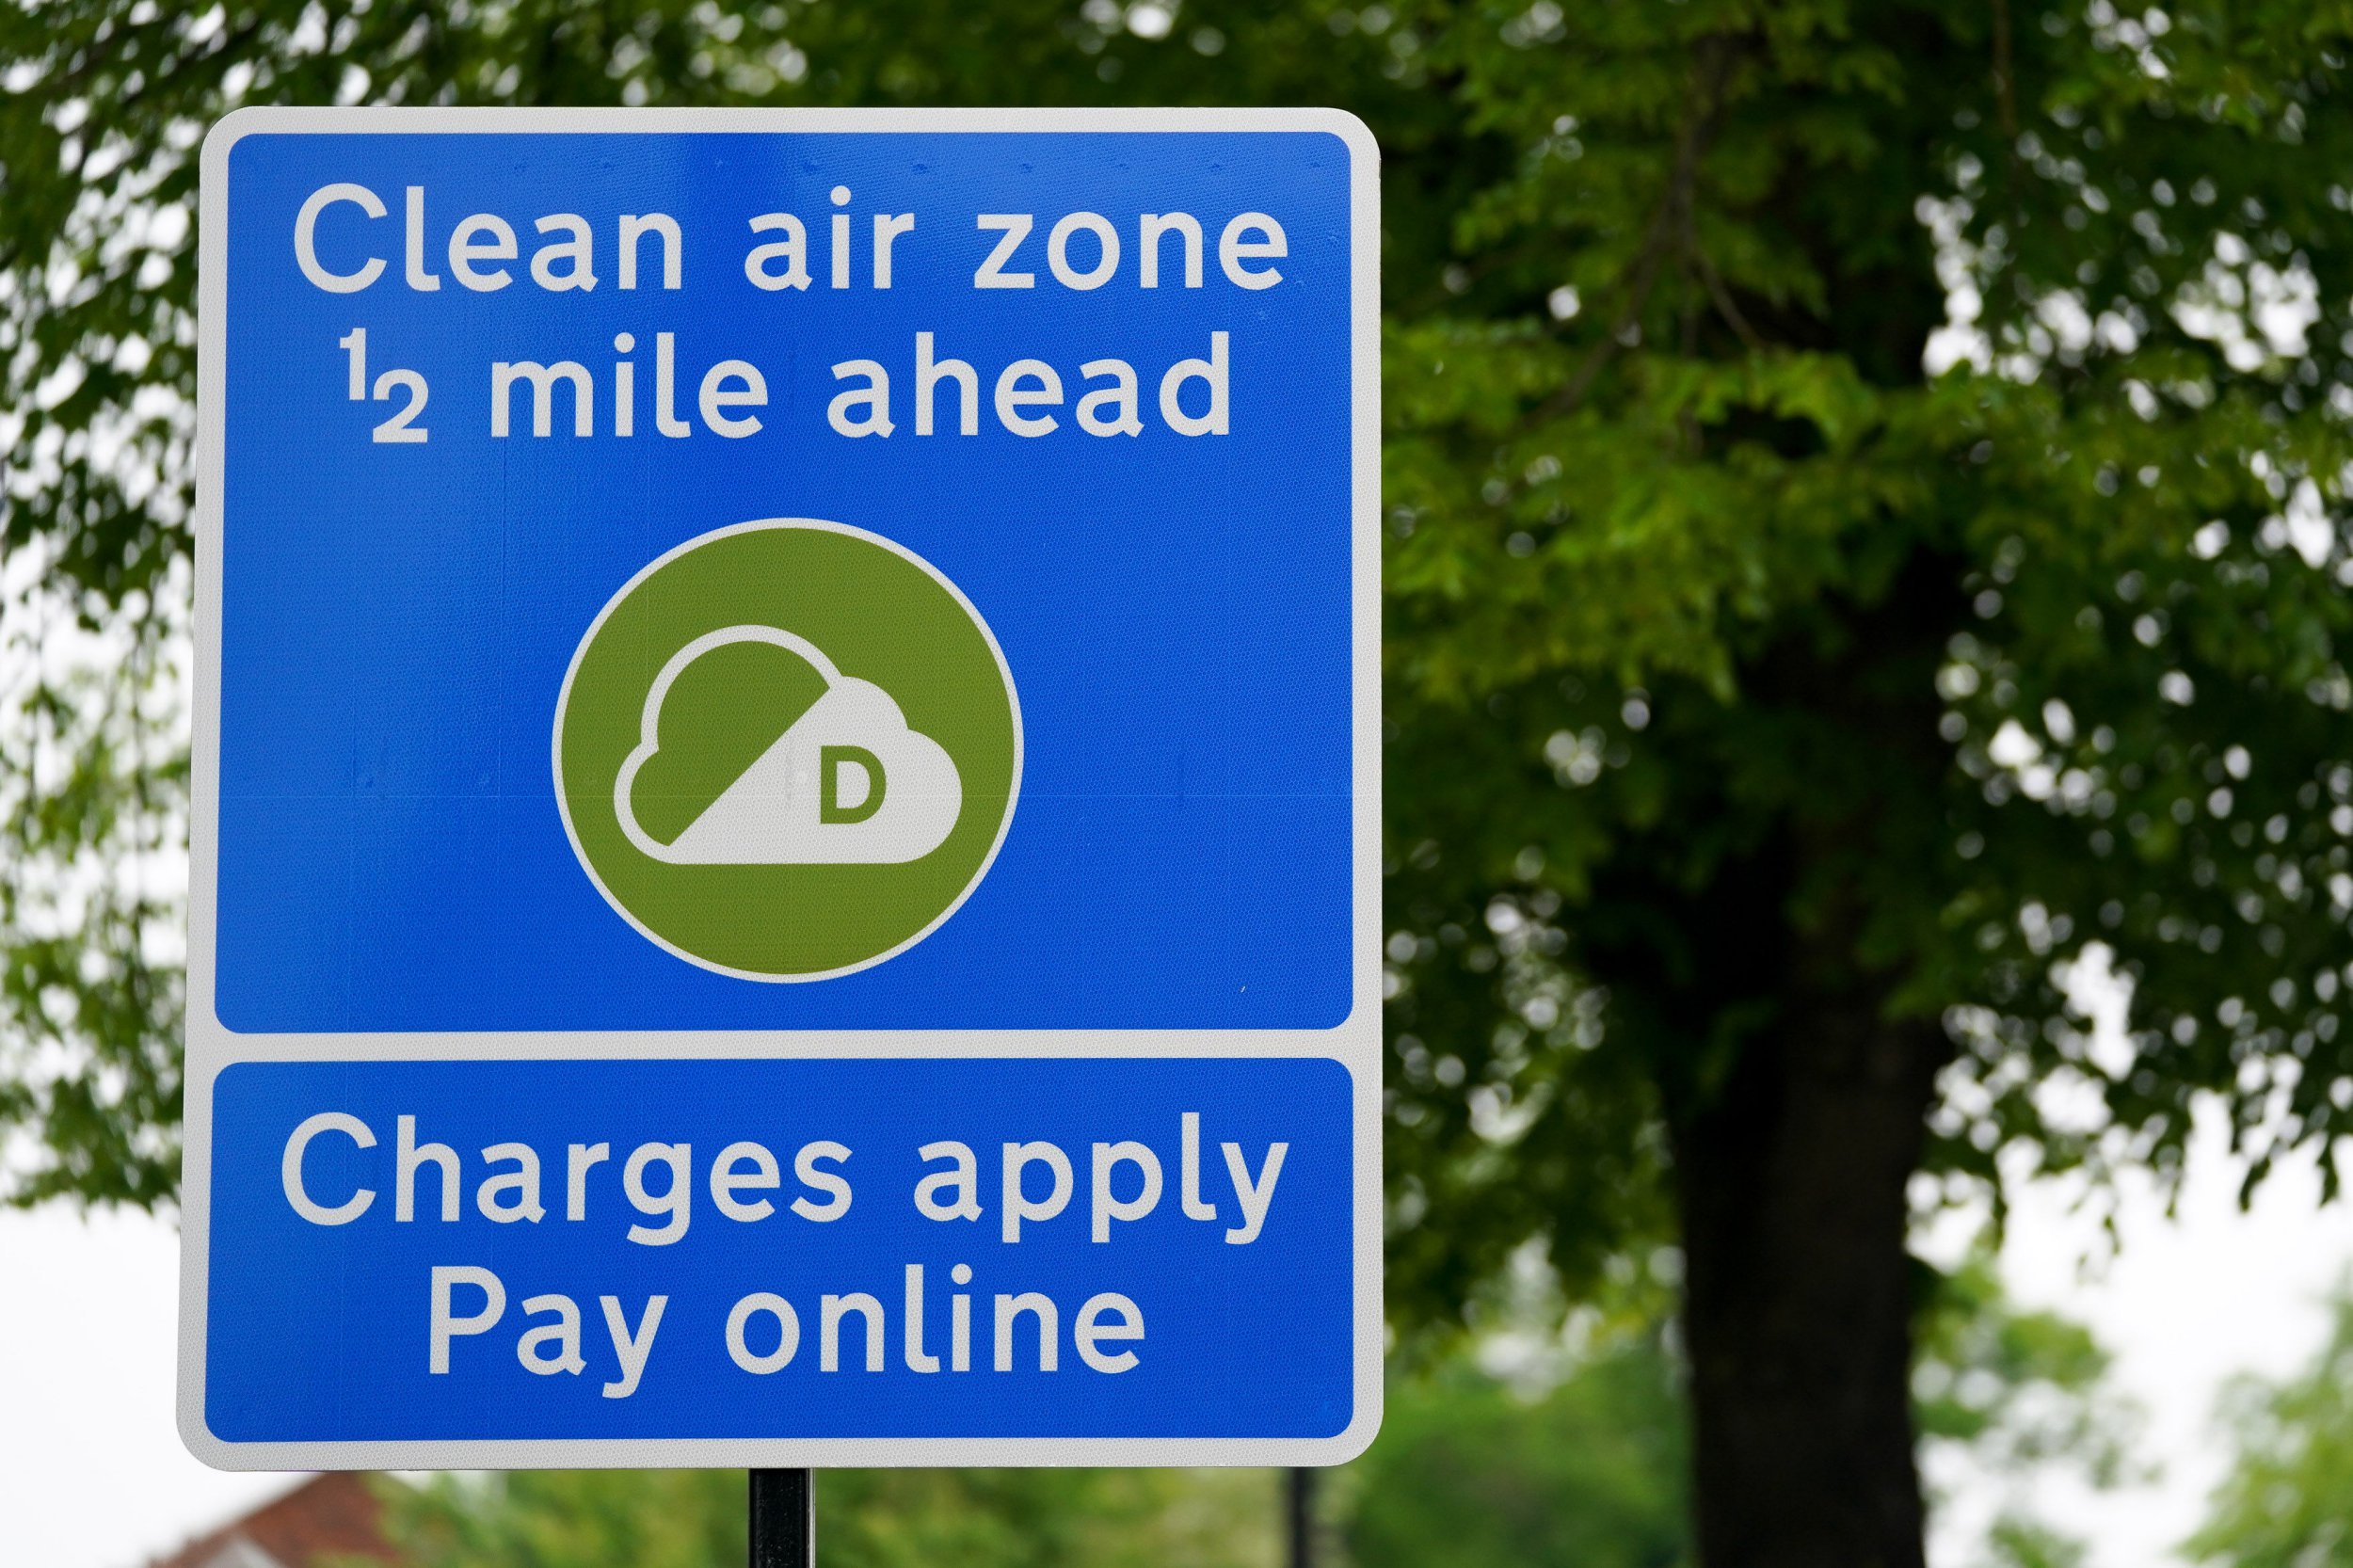 Credit: I News https://inews.co.uk/news/birmigham-clean-air-zone-map-charge-where-apply-rules-explained-vehicle-checker-1029516